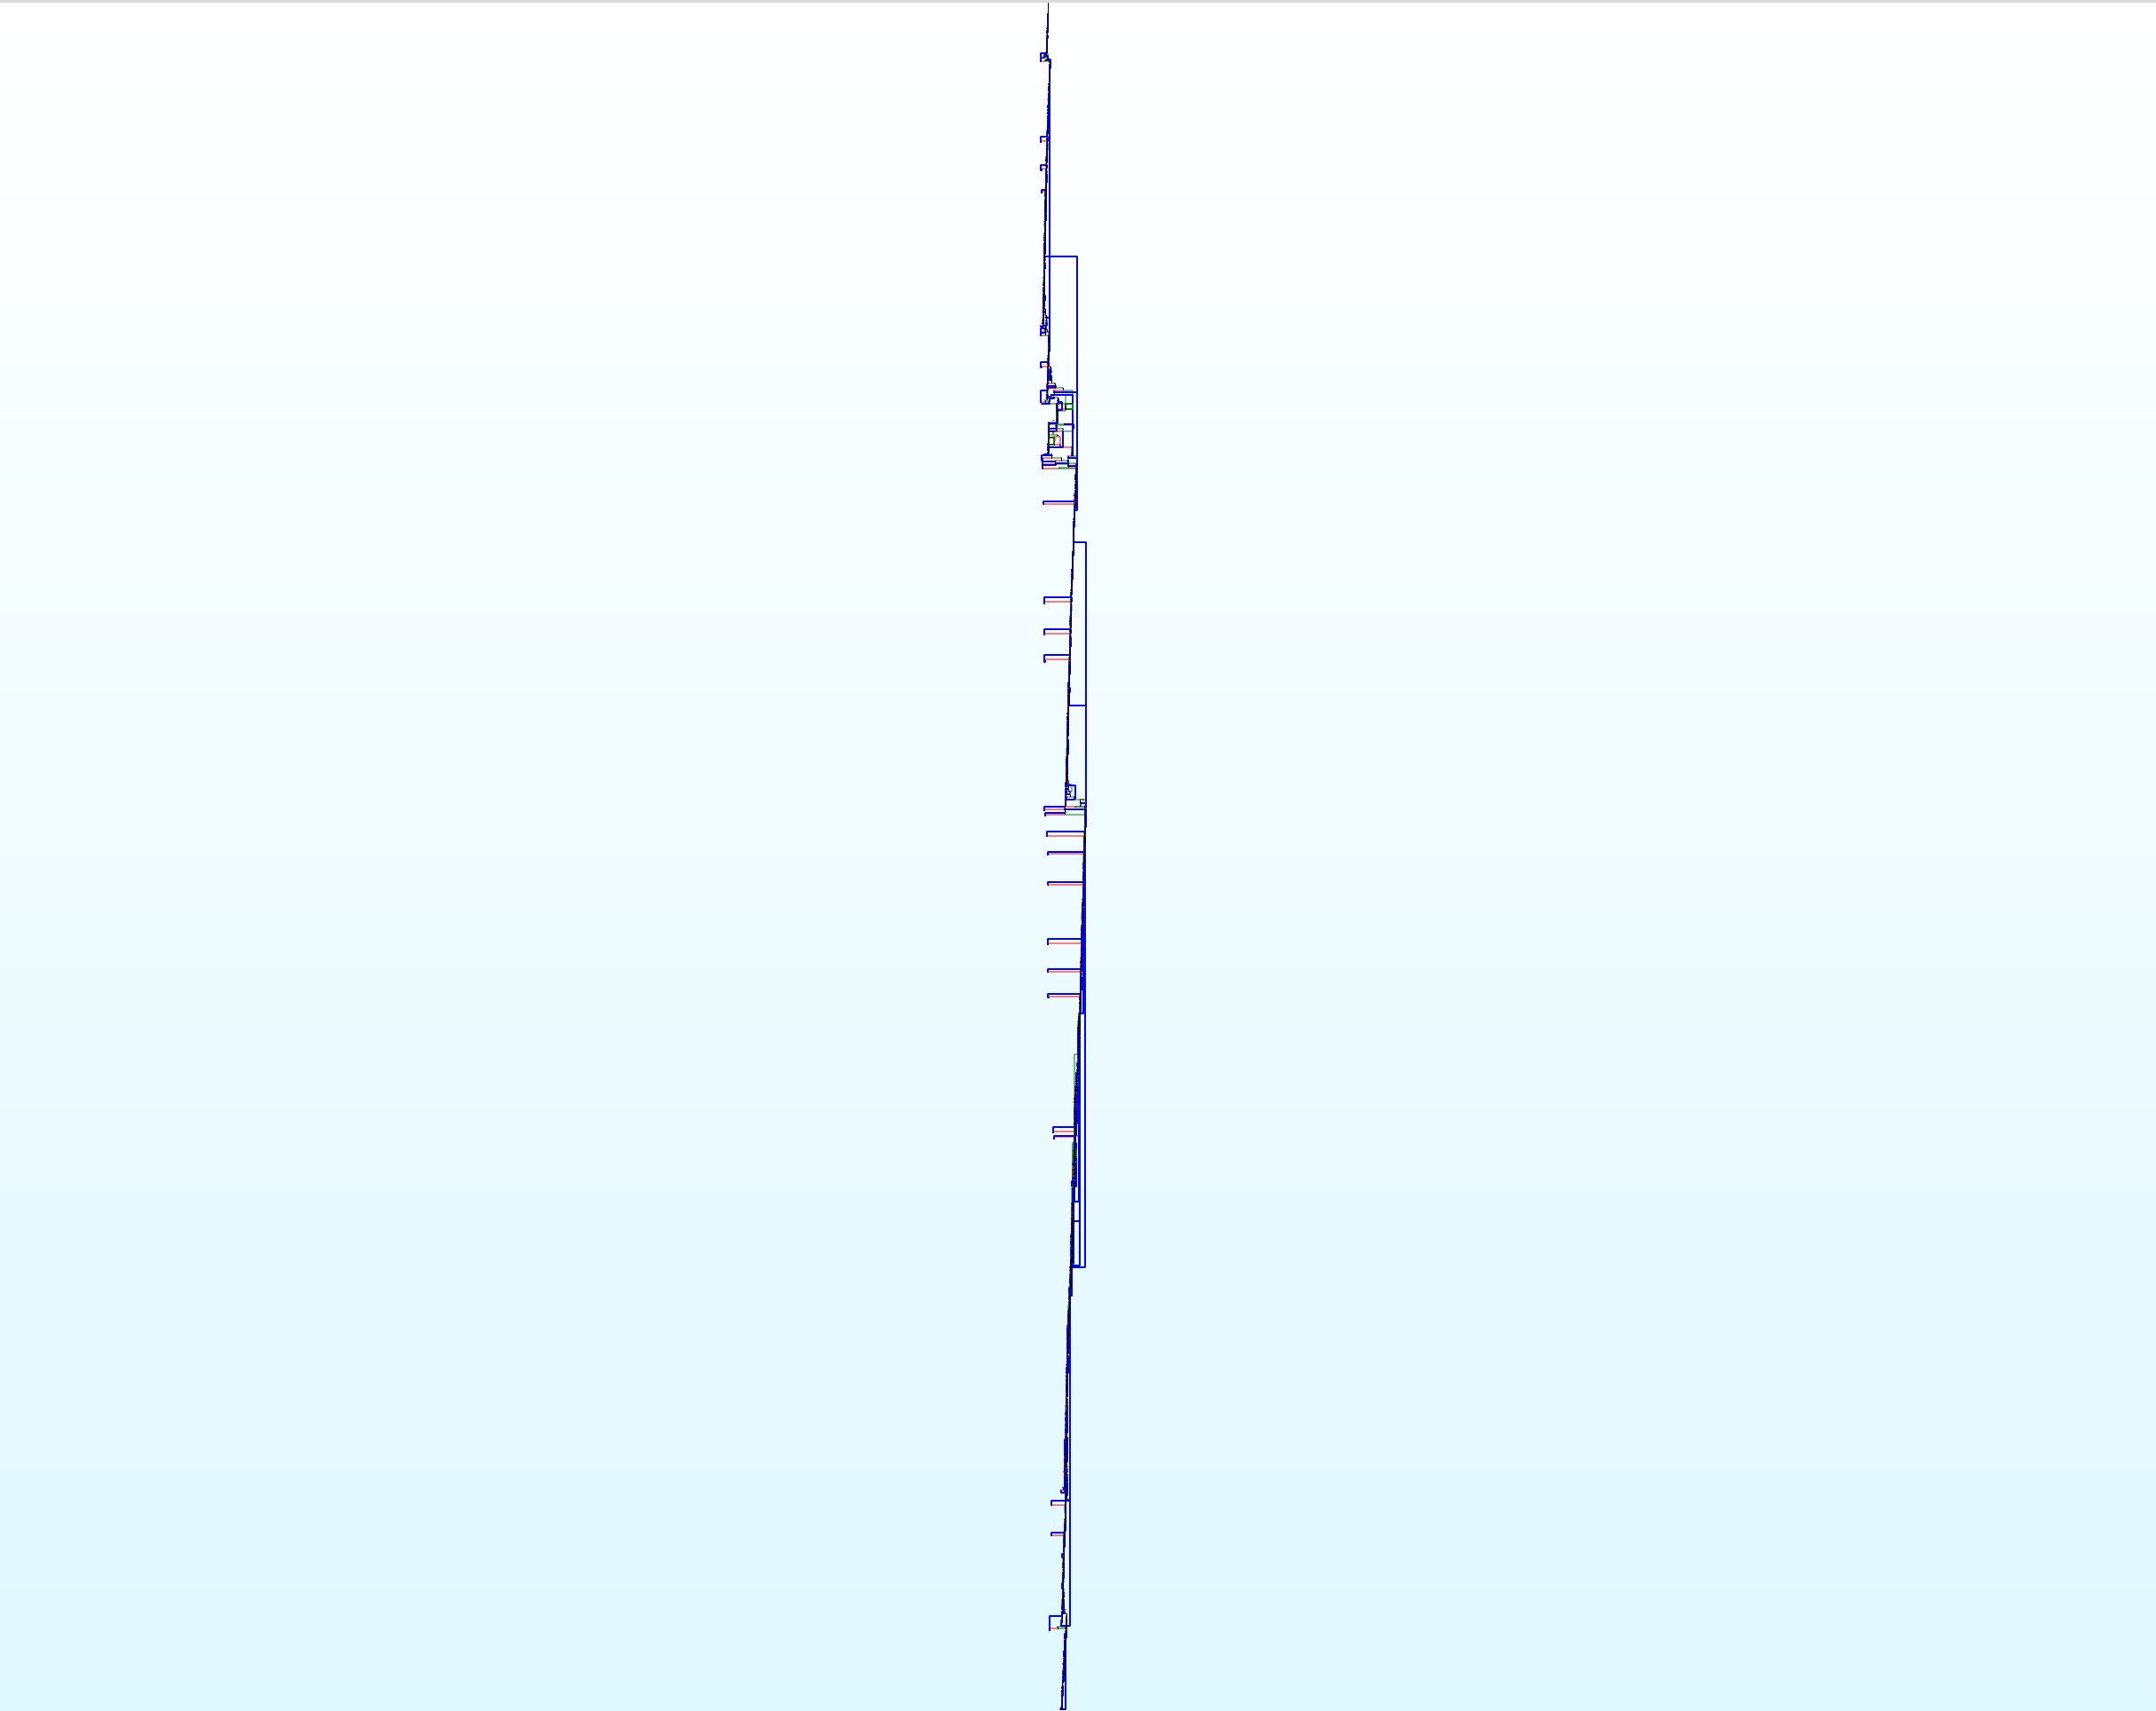 IDA graph view of &lsquo;h&rsquo;, unusually long function